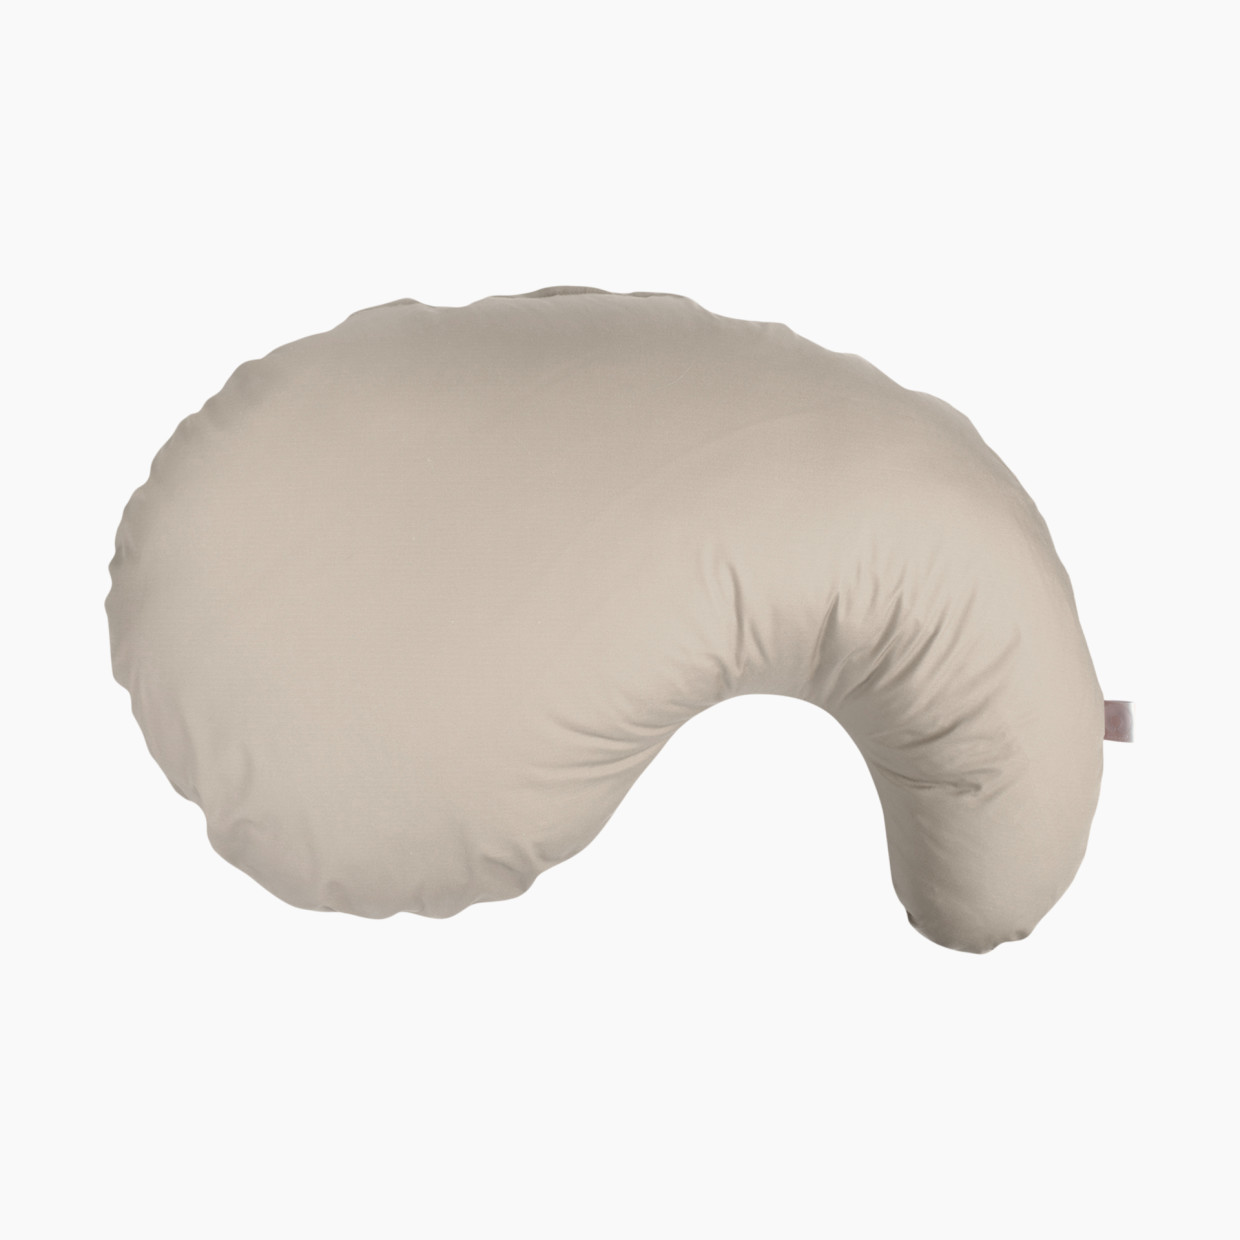 Boppy Cuddle Pillow with Organic Cotton Fabric Removable Cover - Biscuit.